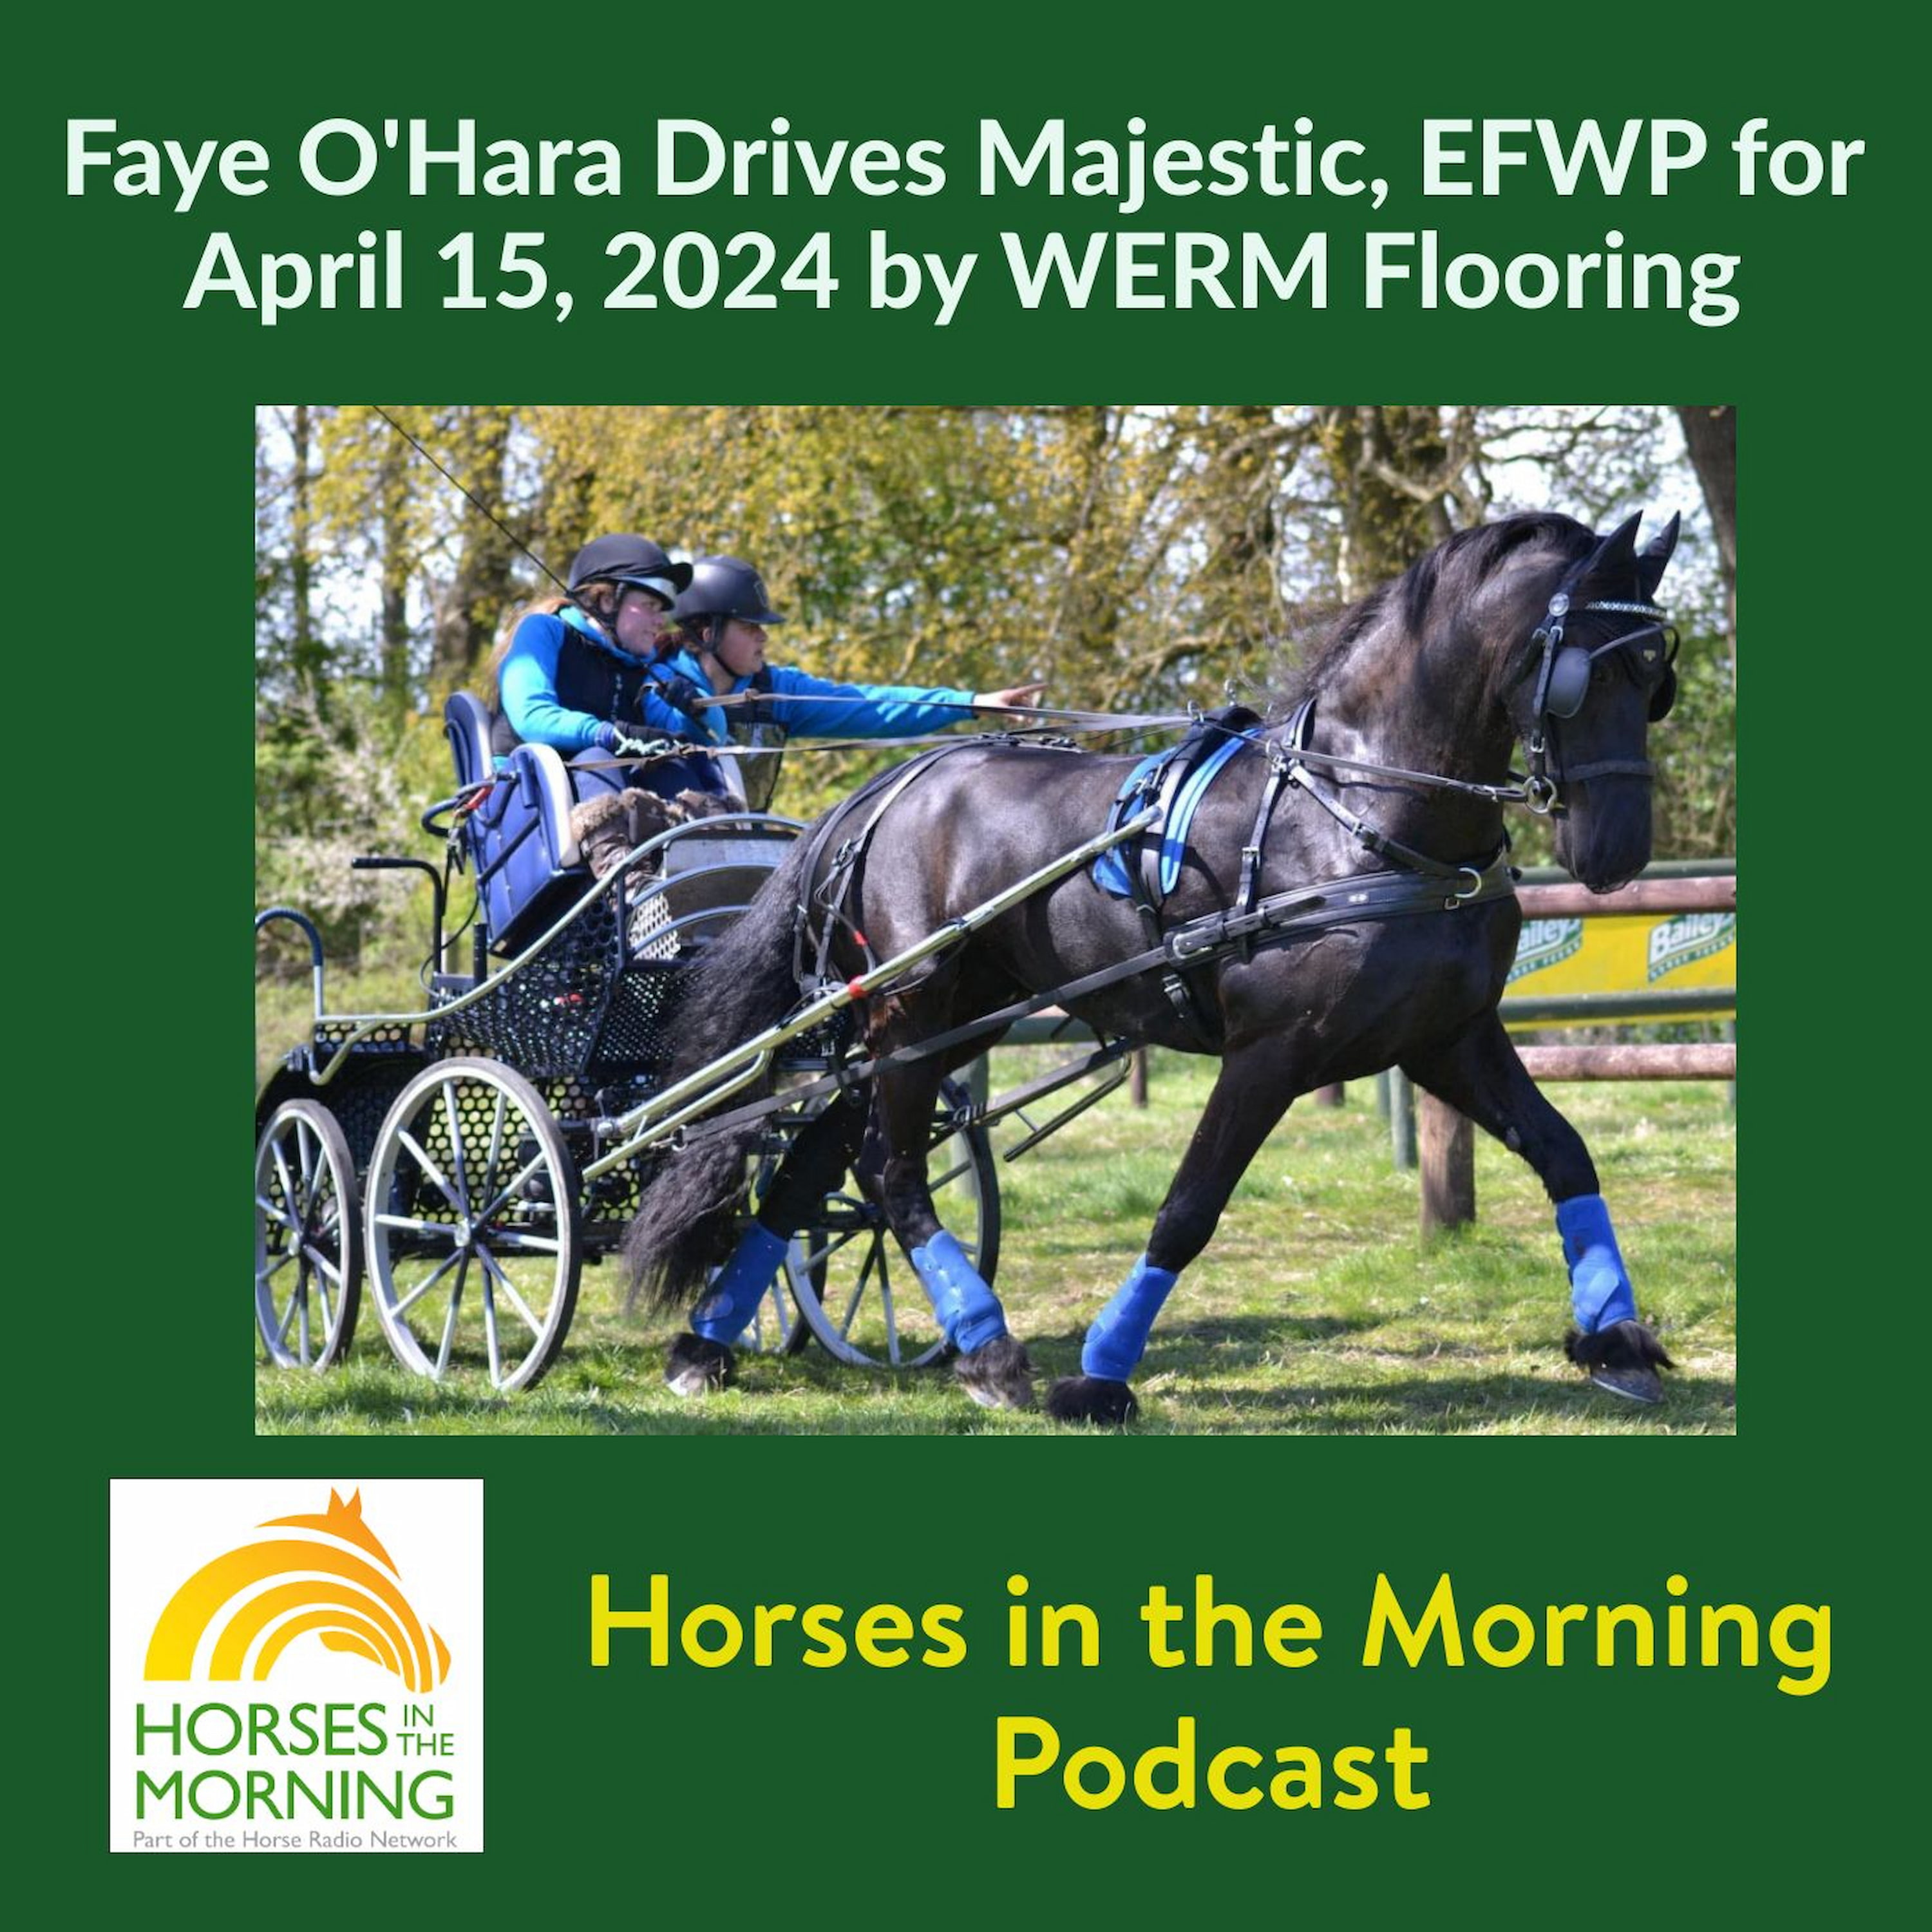 HITM for April 15, 2024: Faye O’Hara Drives Majestic, EFWP by WERM Flooring